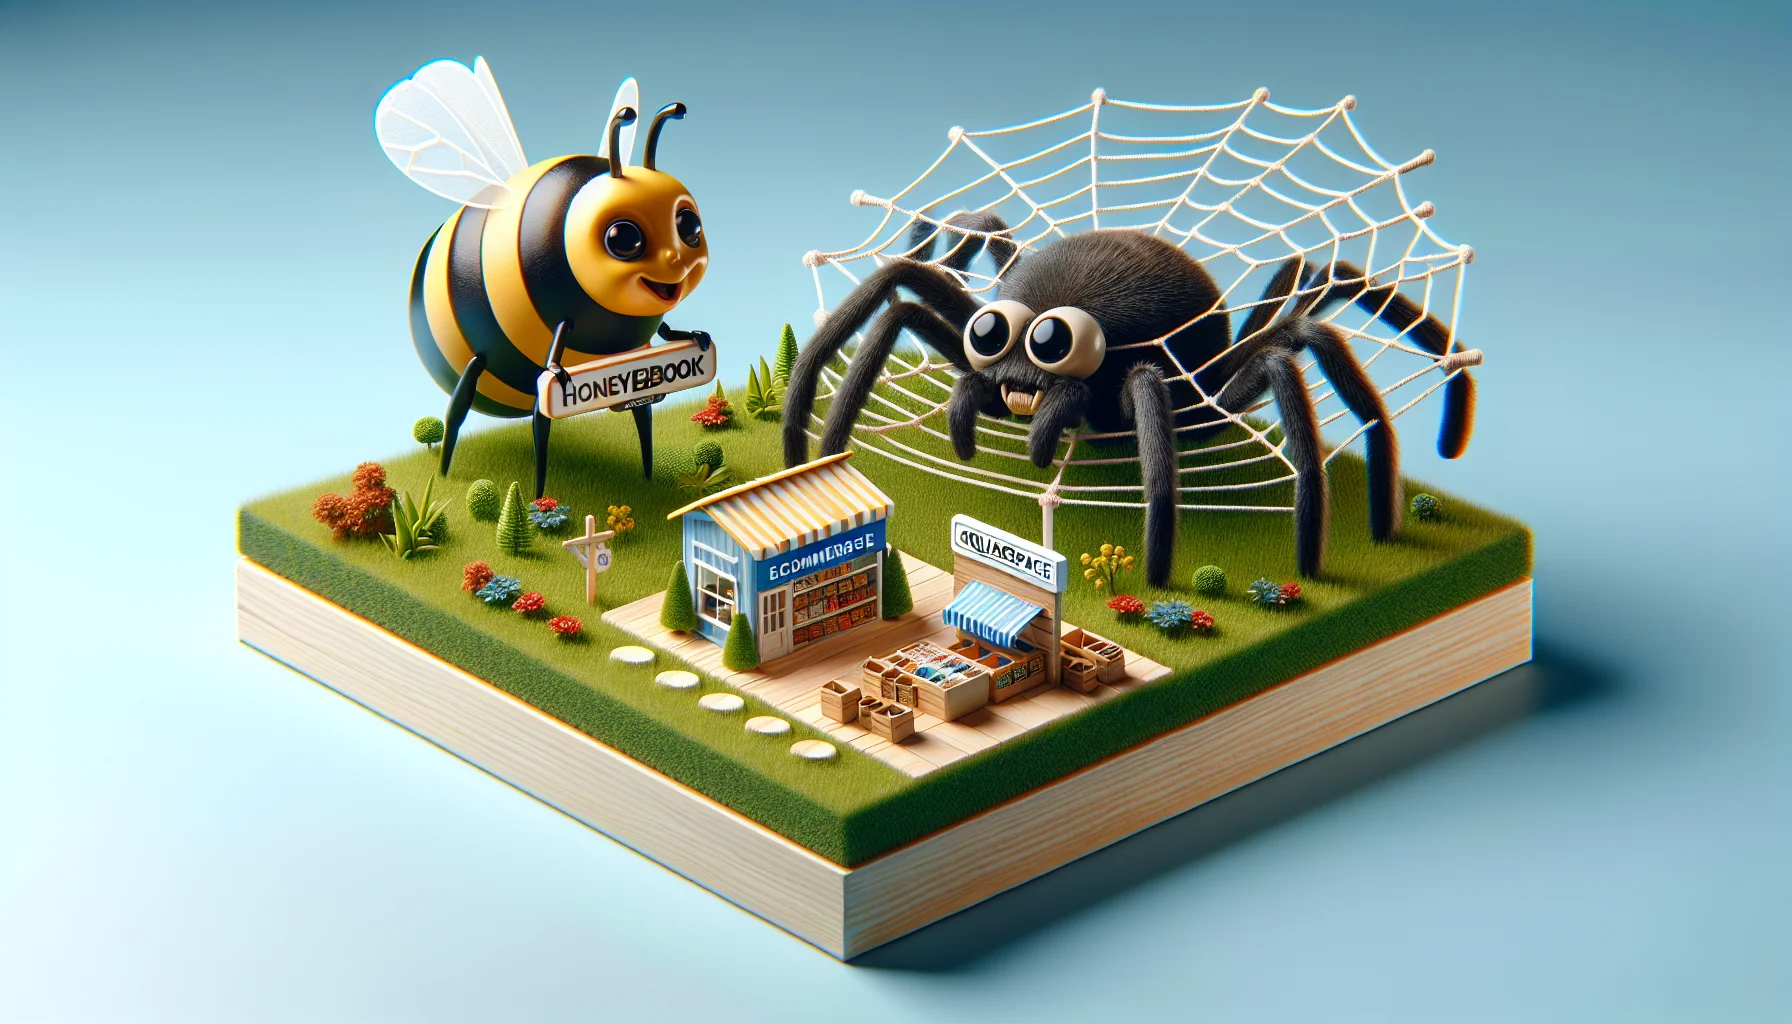 Create a humorously engaging scene where a honey bee is operating a miniature, realistic looking ecommerce store, symbolizing Honeybook integration. The setup should be placed on a beautifully squared patch of land, hinting at Squarespace. To entice web hosting, include a large, friendly spider weaving a web that looks like a network of interconnected servers. The scene should incorporate lighthearted, amusing elements to keep it fun and enticing.